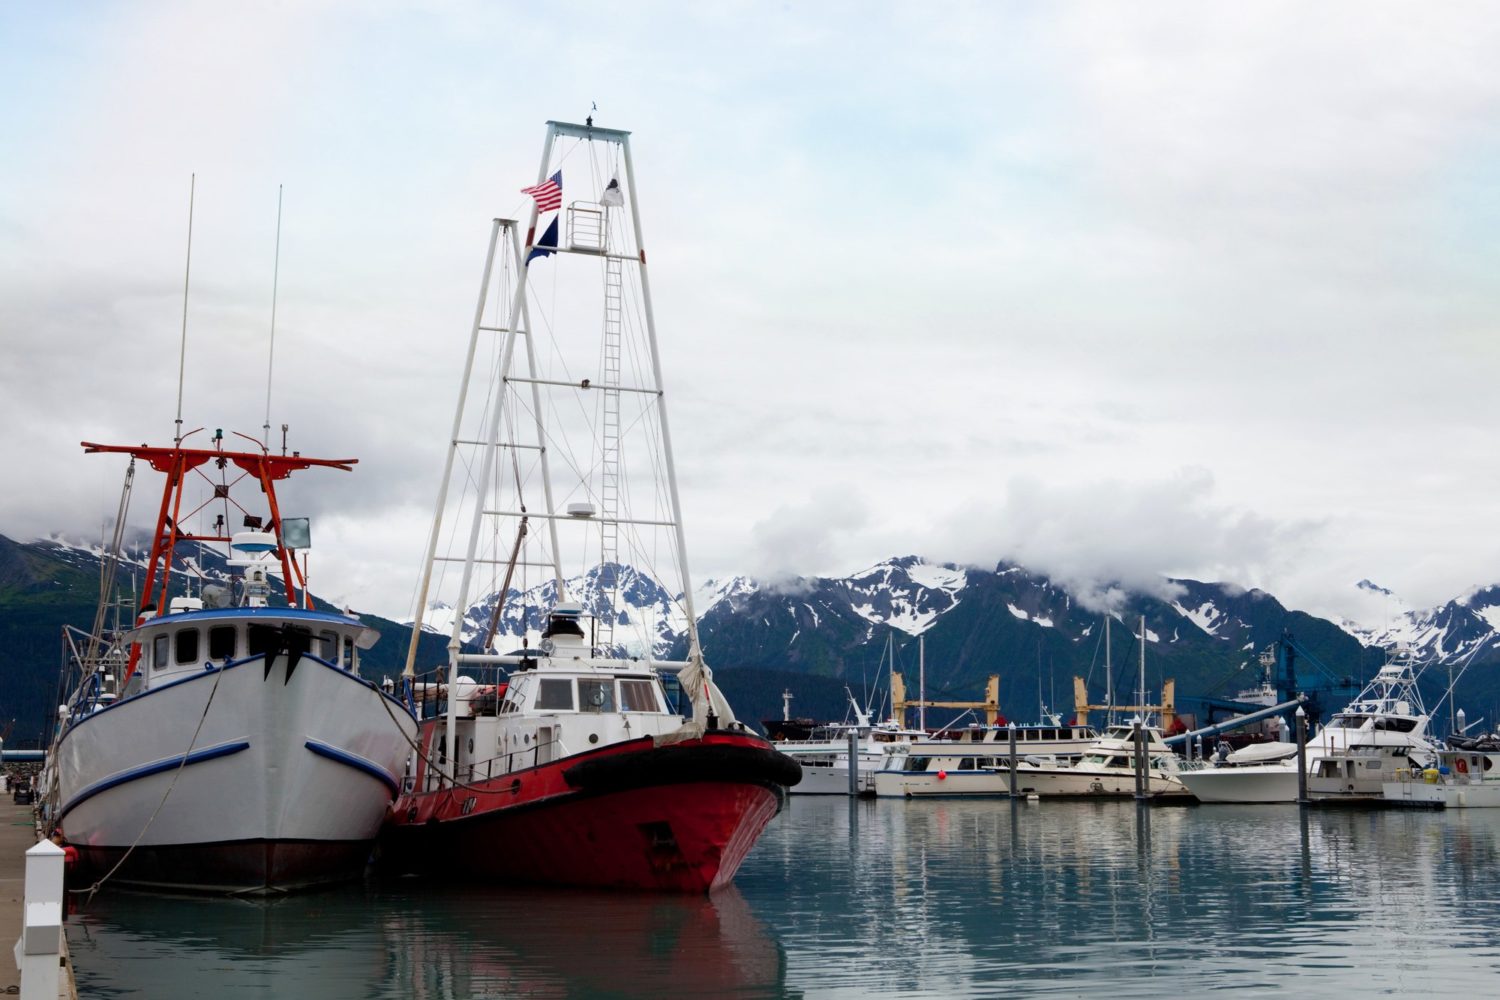 A group of fishing boats sit in a harbor with an expansive snow-topped mountain backdrop. July 2020